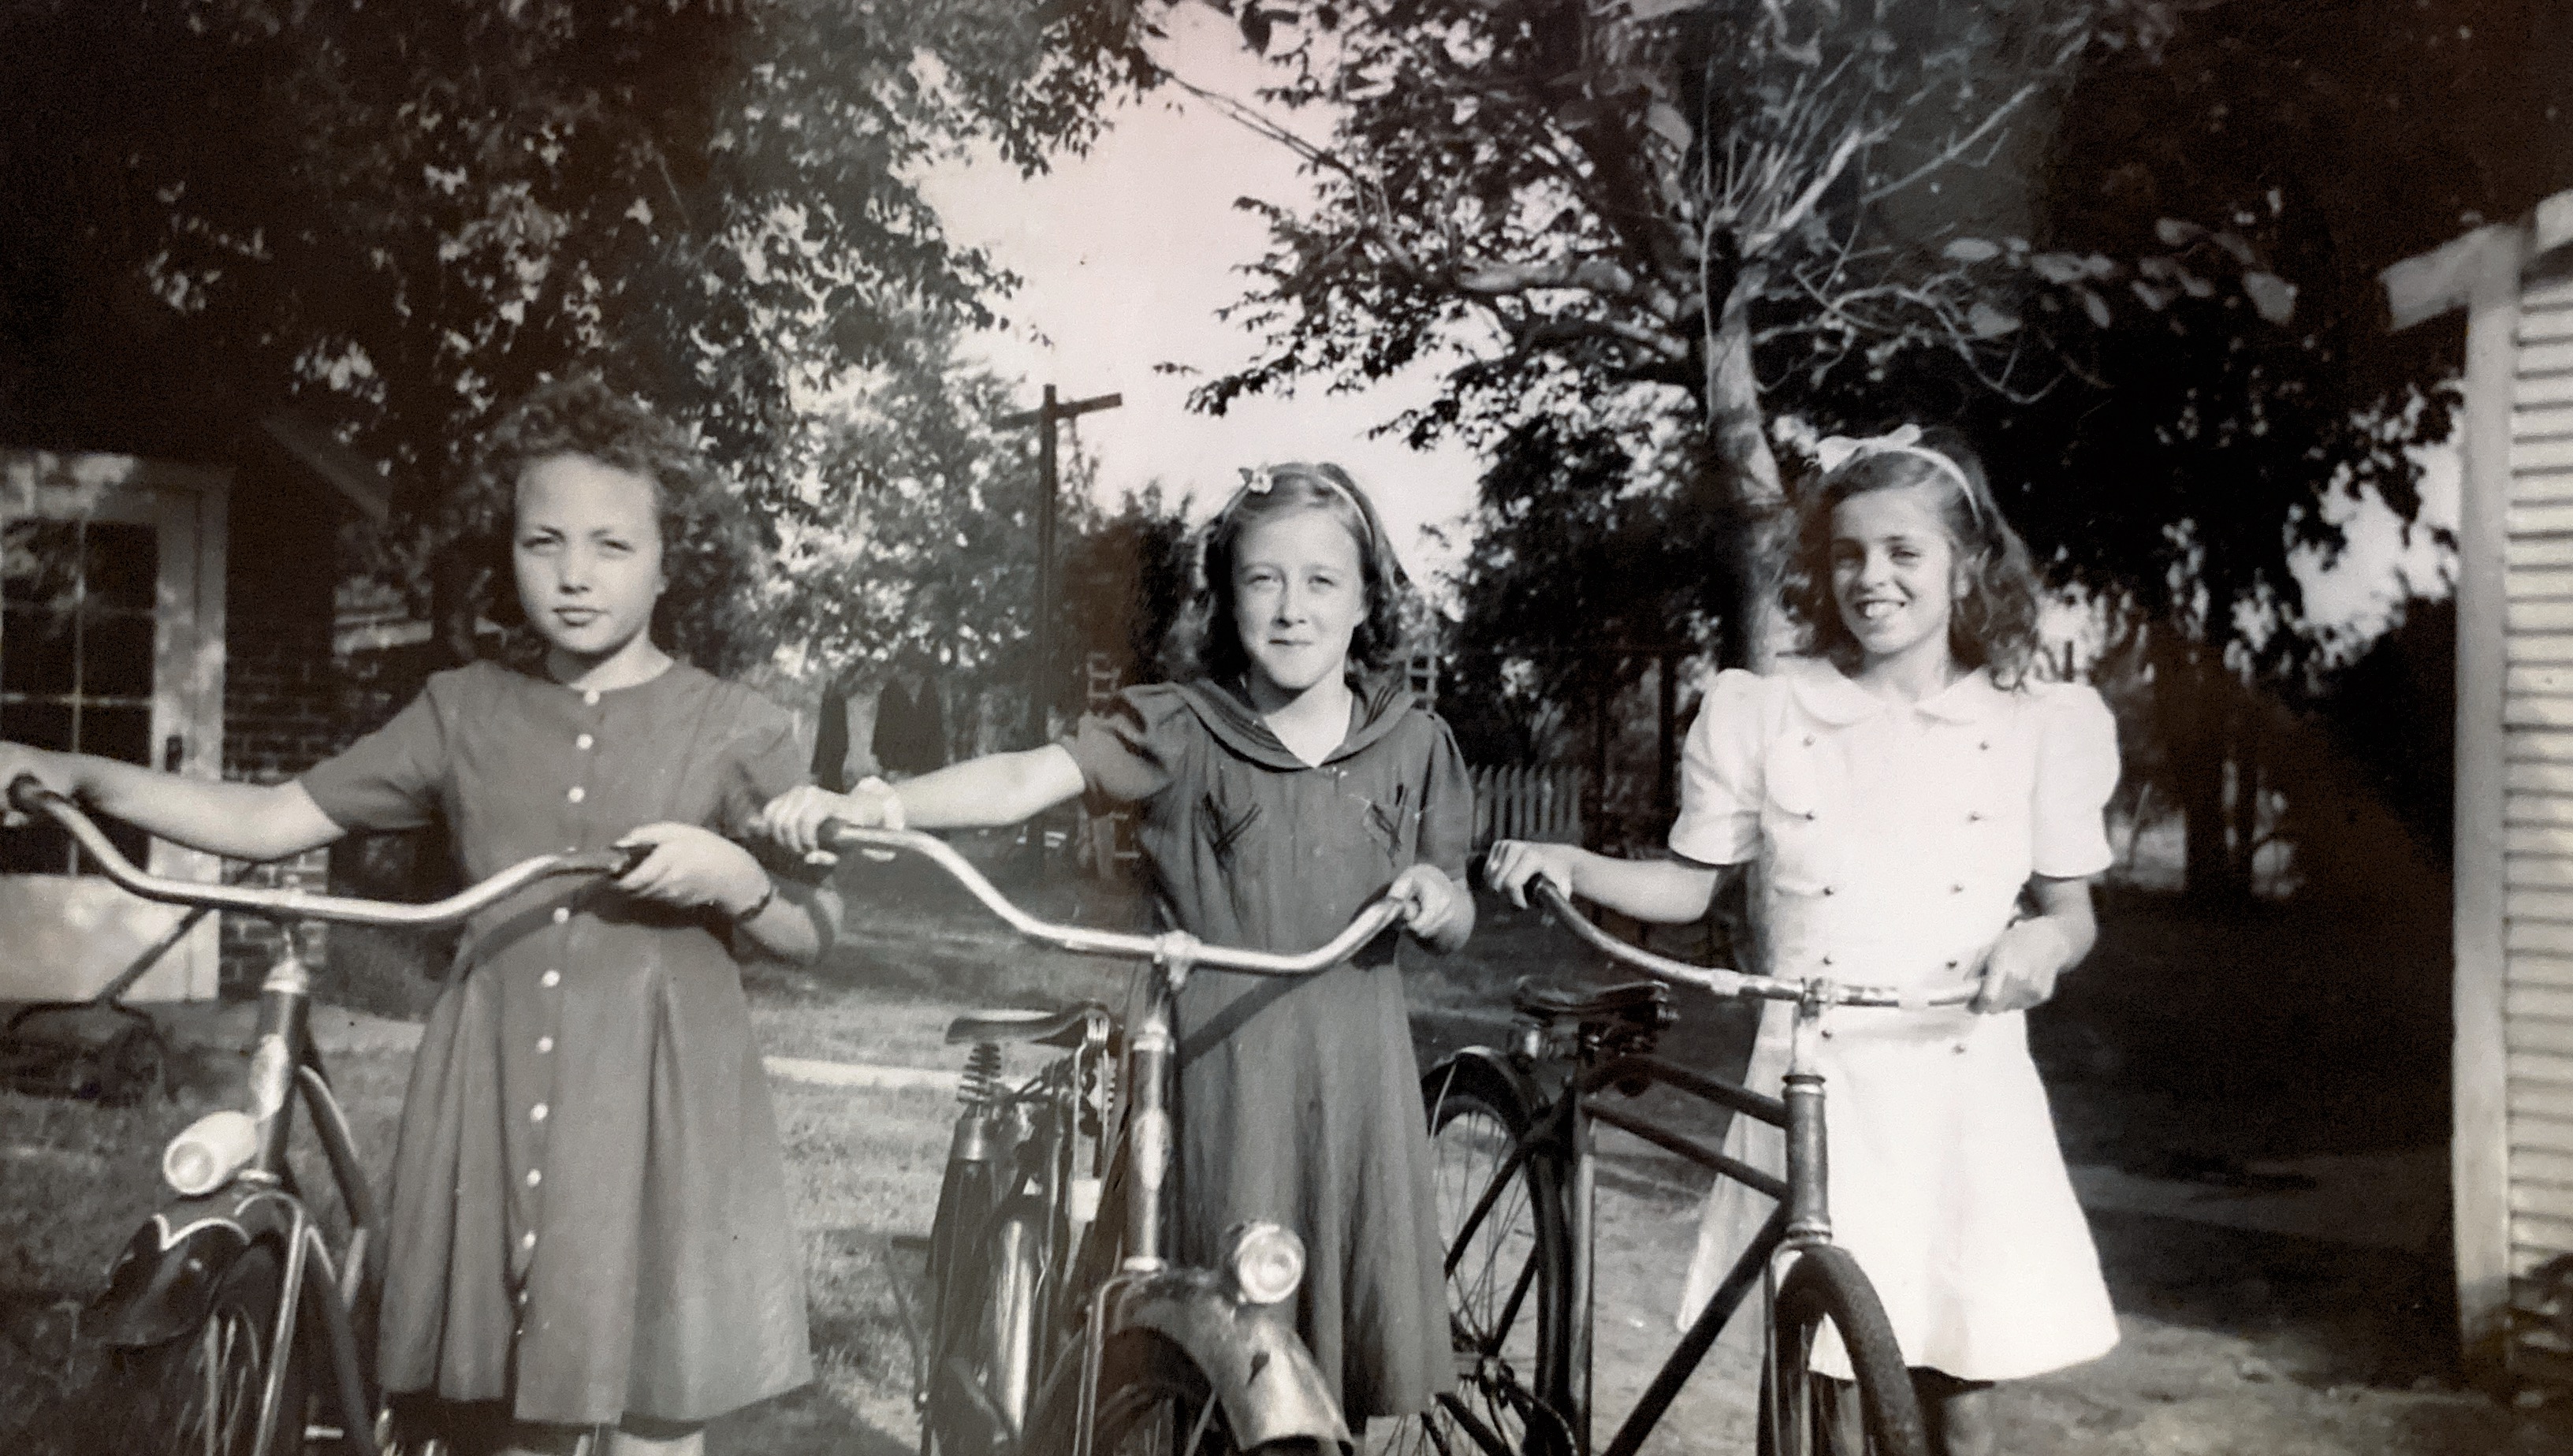 My grandmother, Sue (middle), with some neighborhood friends in Wichita, 1946.